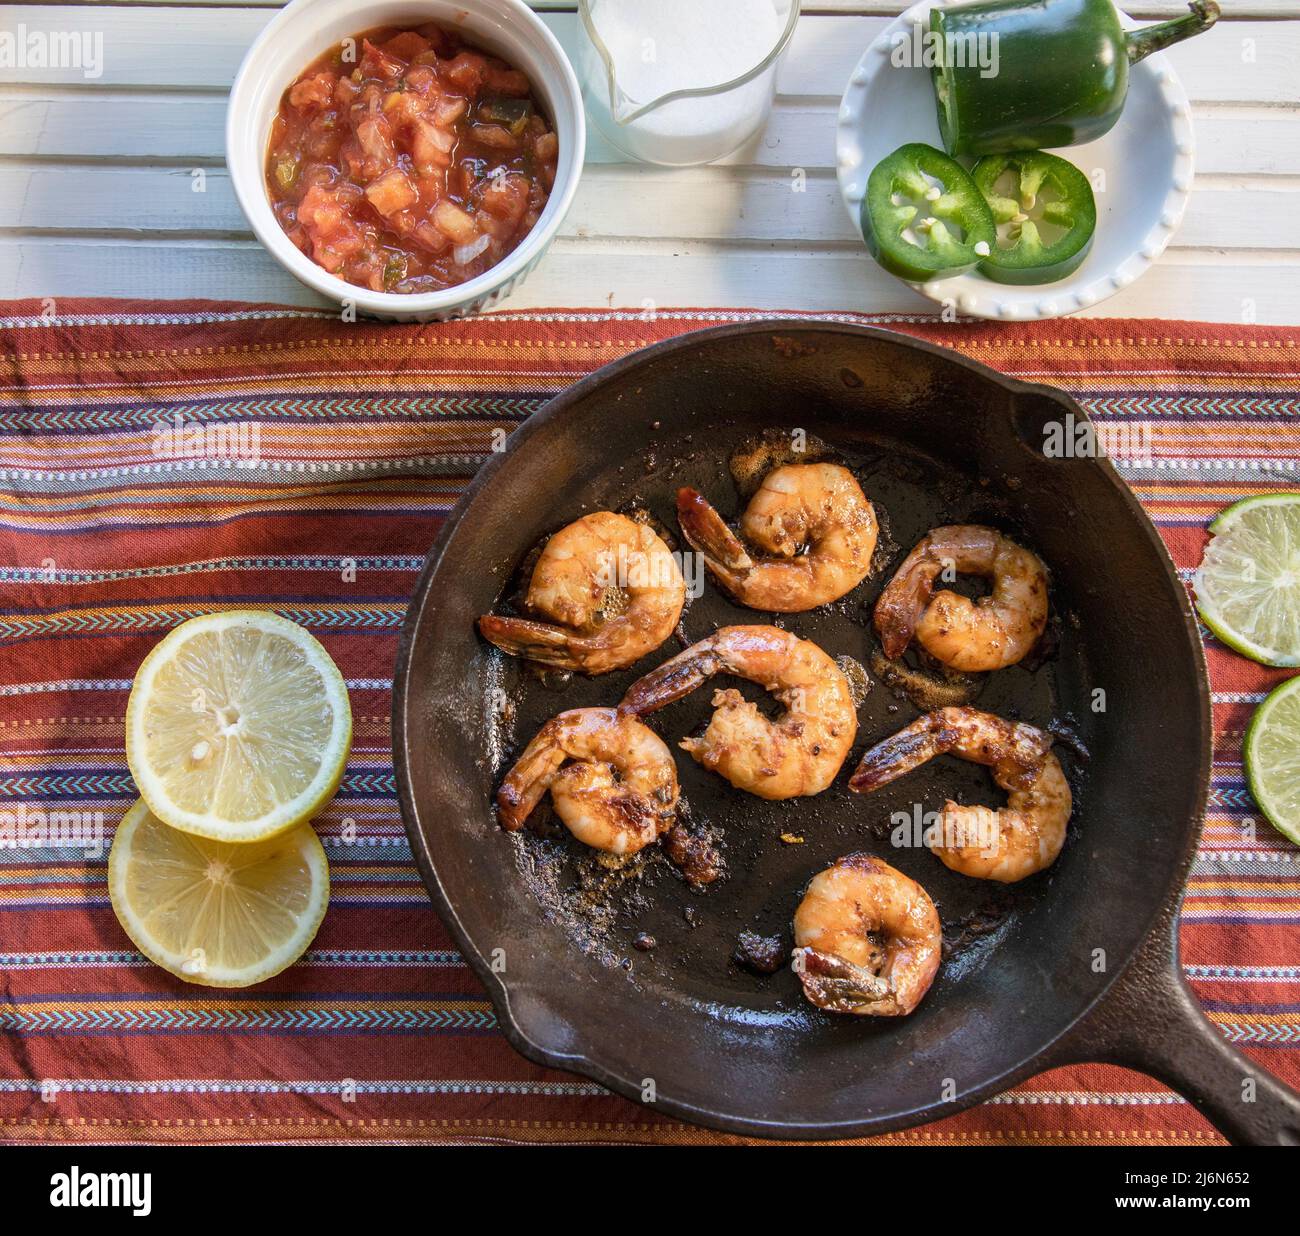 Top View of Shrimp Cooked in a cast-iron skillet. Stock Photo